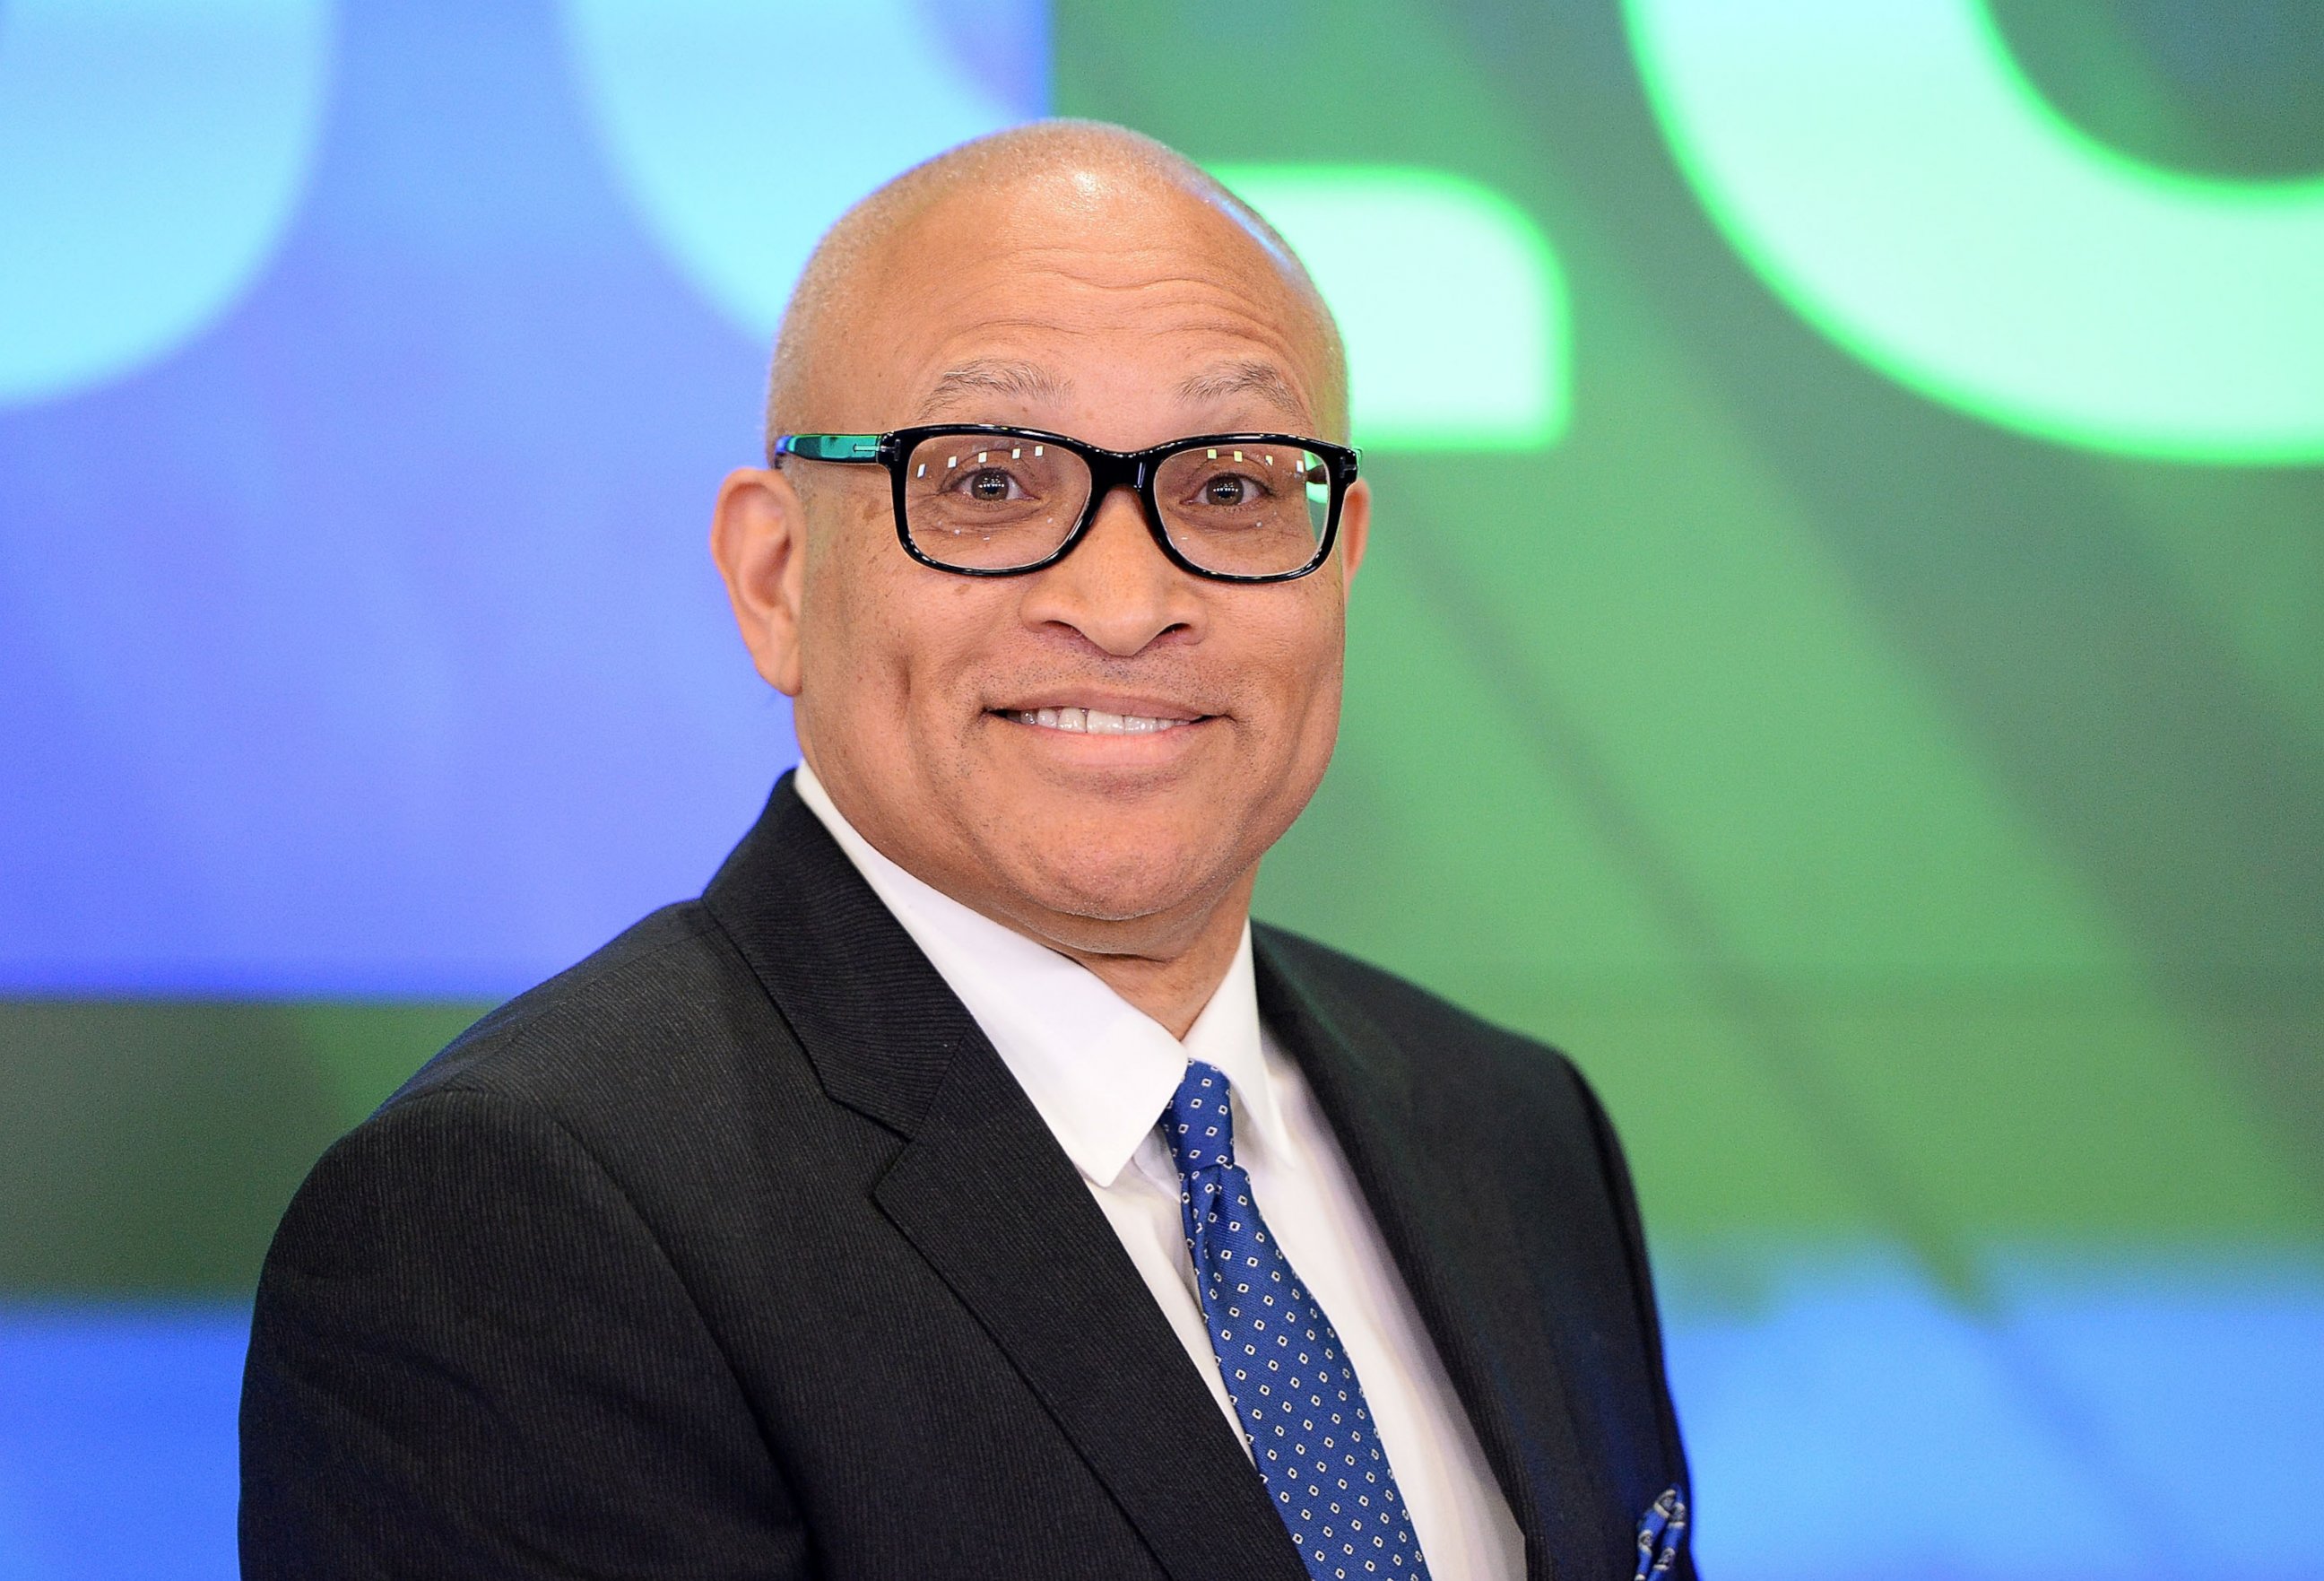 PHOTO: Larry Wilmore attends Viacom Inc. & Comedy Central's "The Nightly Show with Larry Wilmore" ring the Nasdaq Stock Market Closing Bell at NASDAQ on Jan. 23, 2015 in New York City.